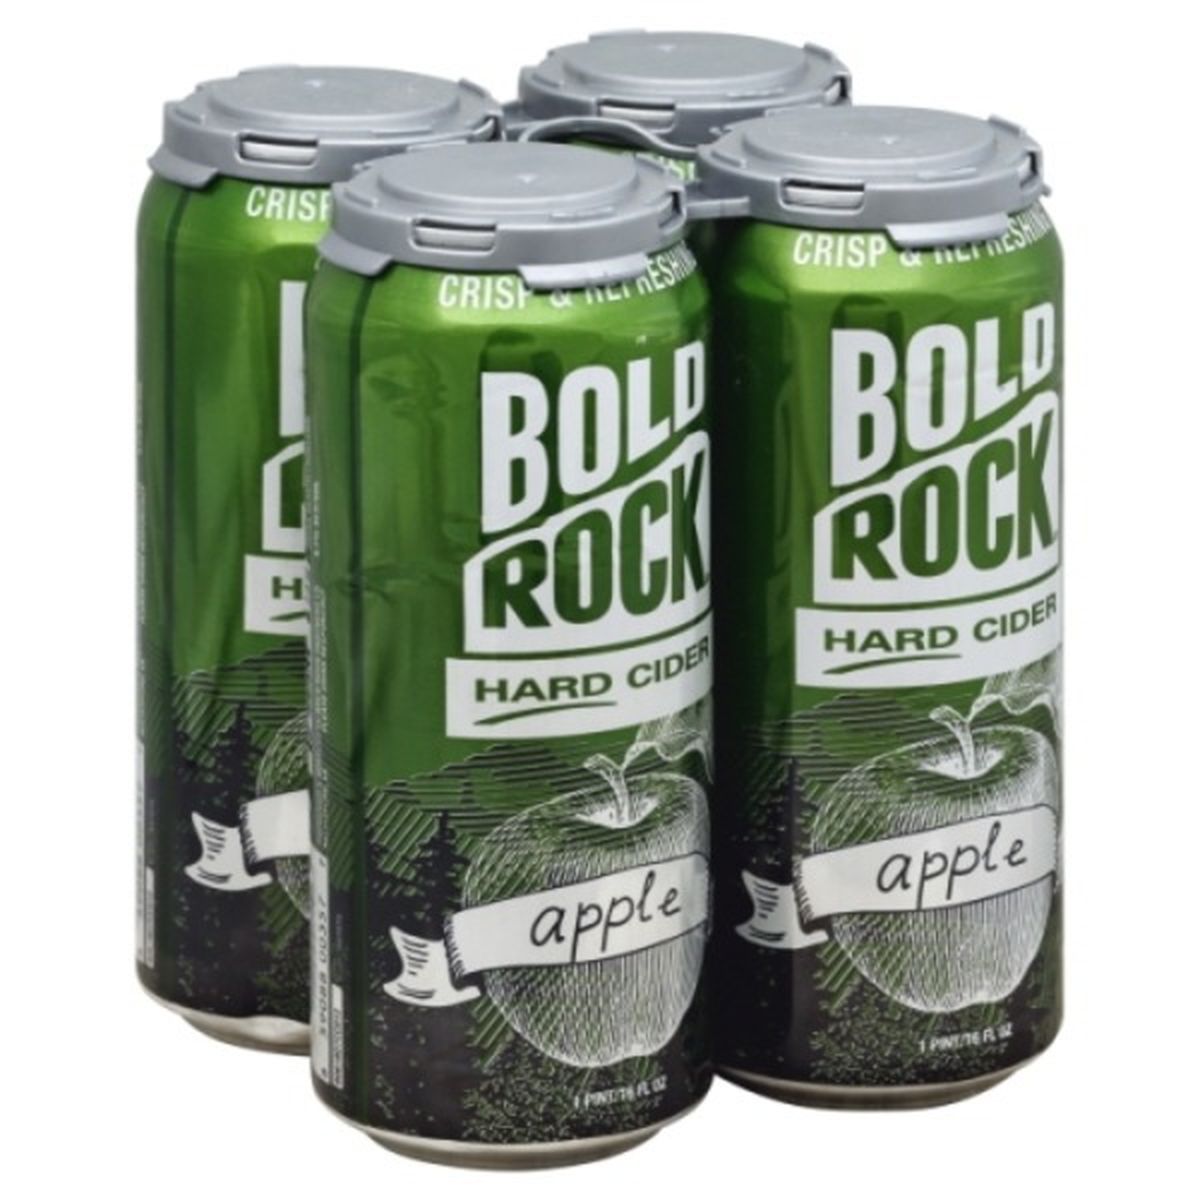 Calories in Bold Rock Apple Hard Cider 4/16 oz cans